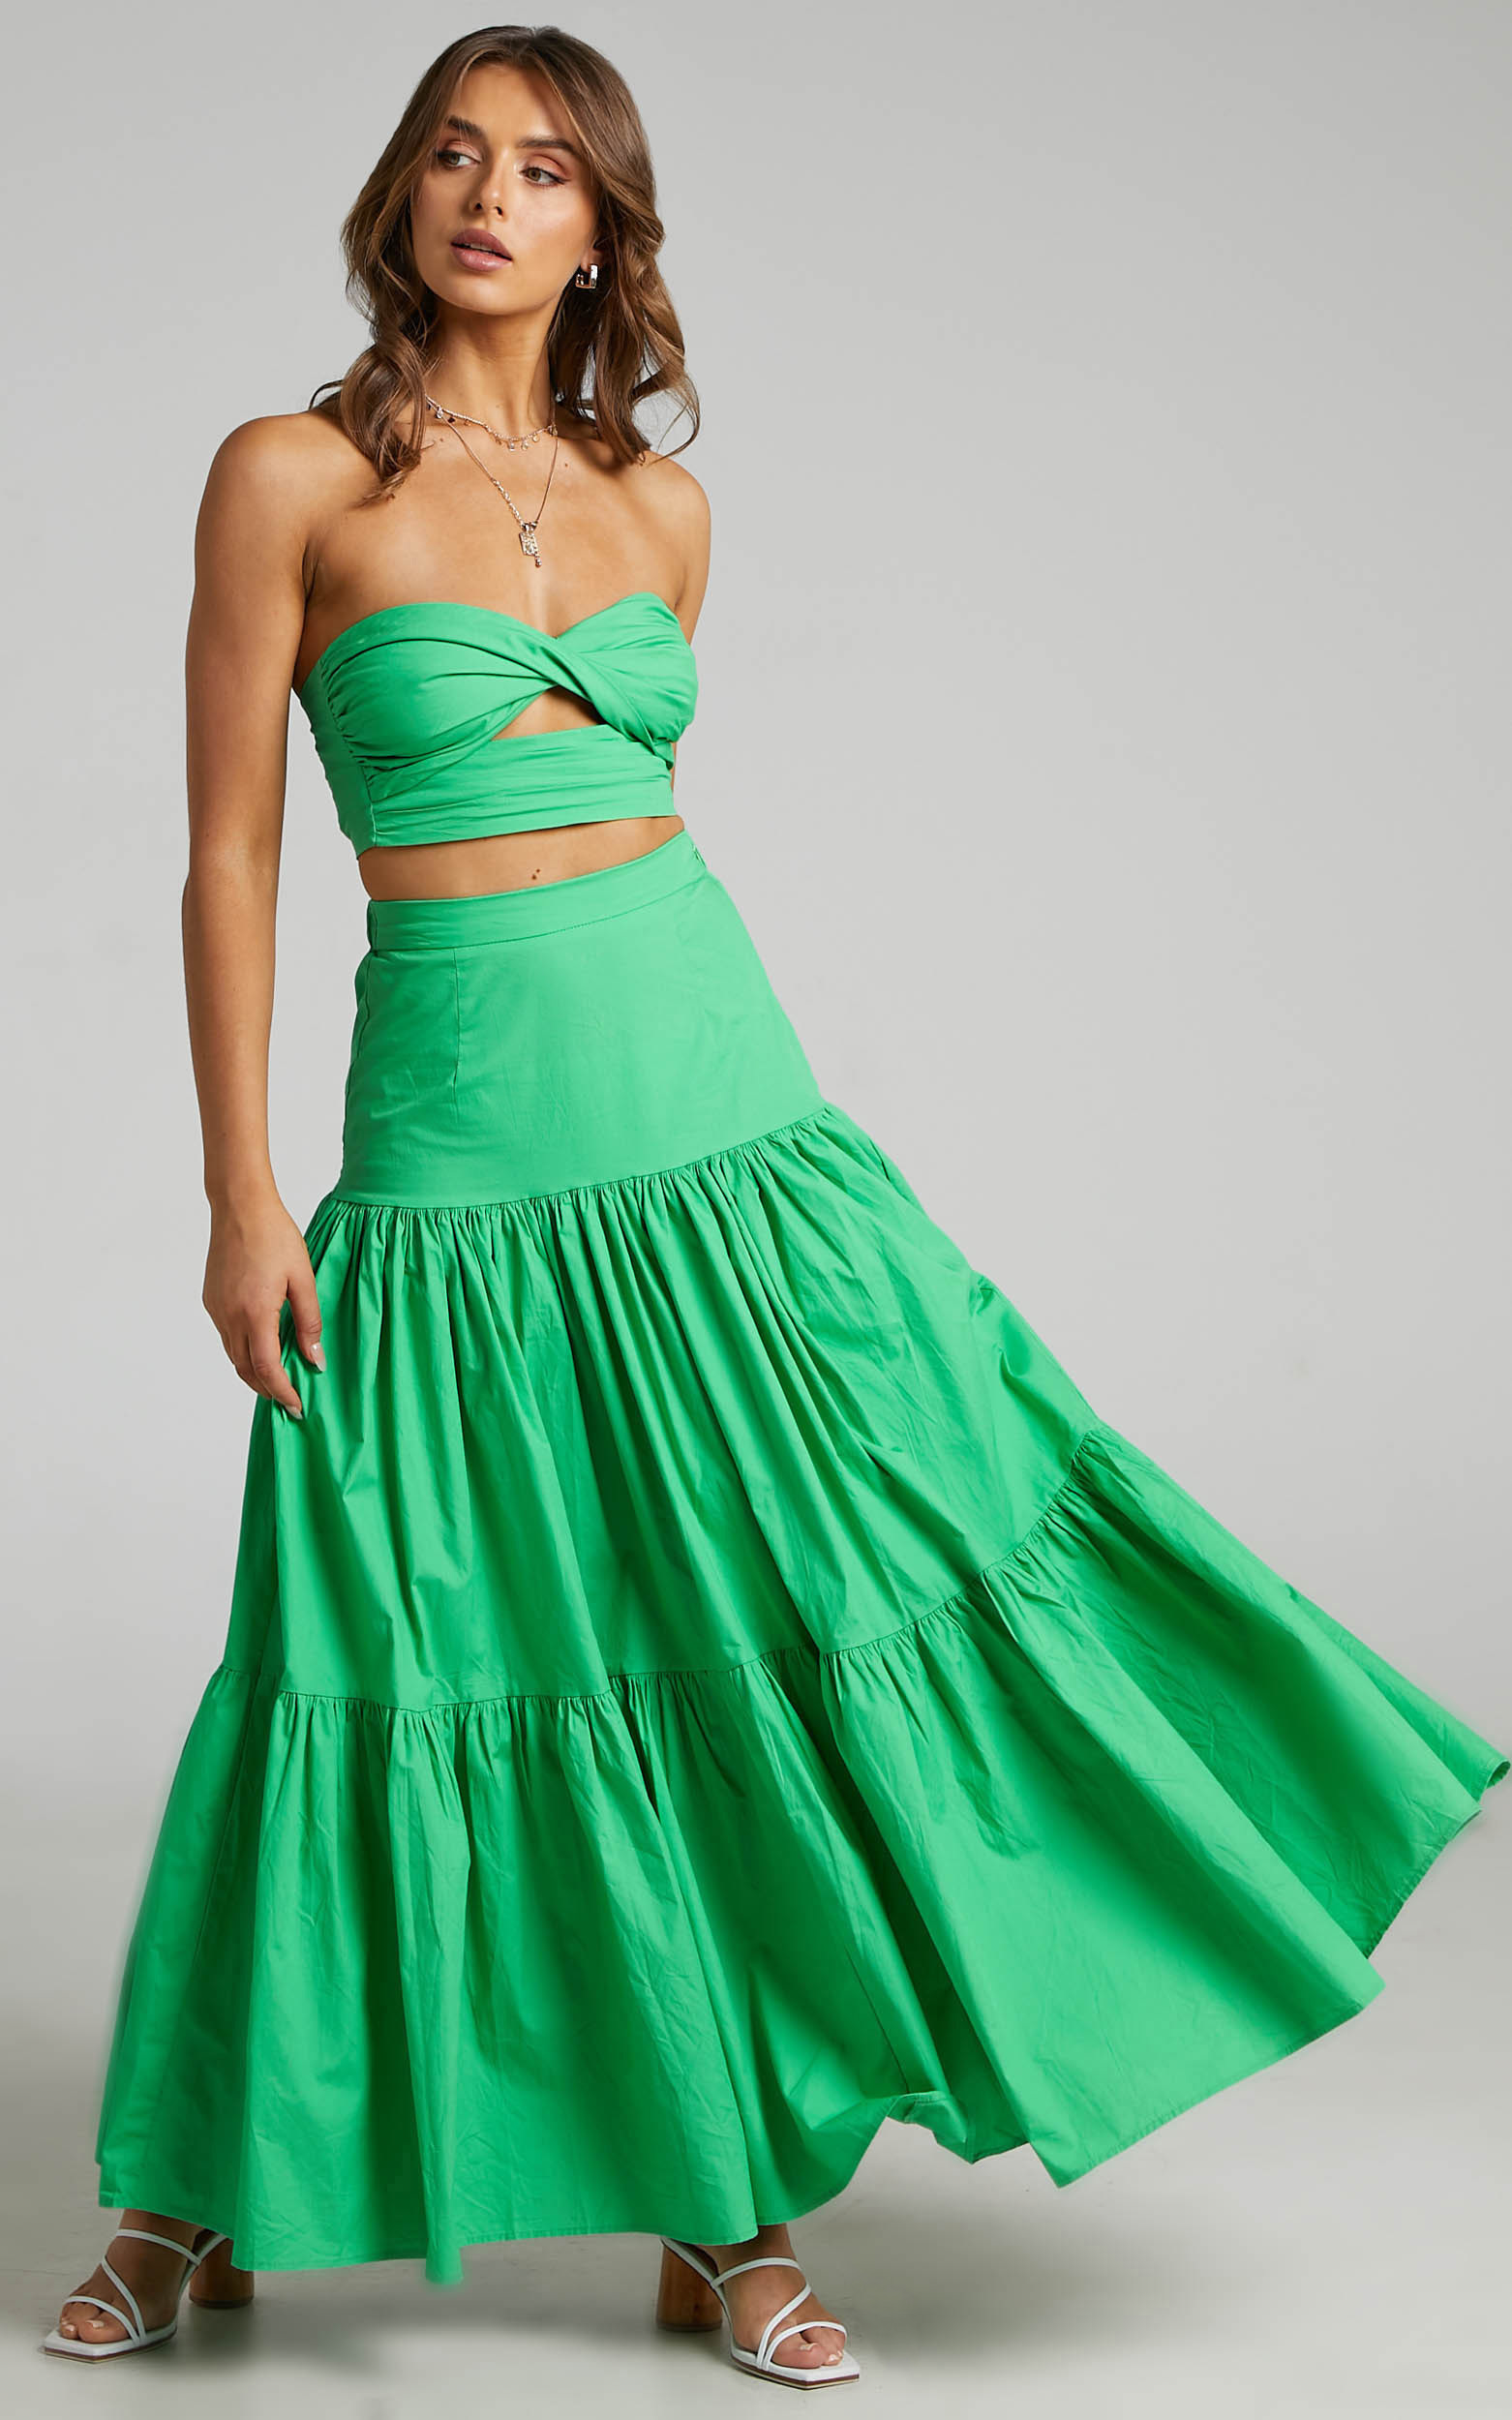 Runaway The Label - Ayla Maxi Skirt in Green - L, GRN3, hi-res image number null